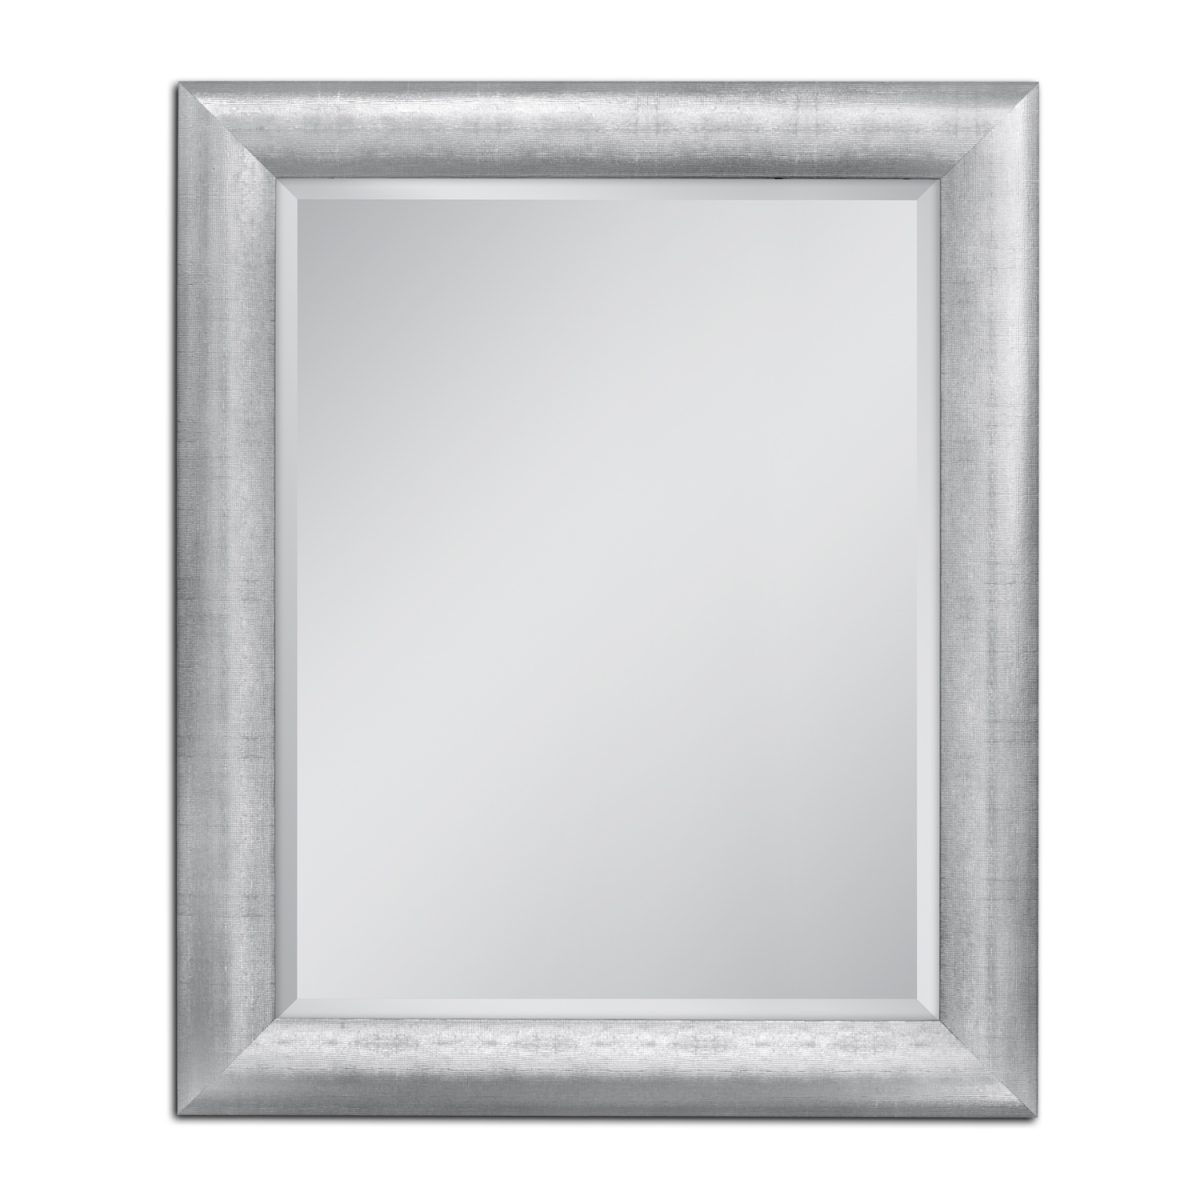 Head West 8109 28 X 34 In. Pave Weave Wall Mirror Chrome